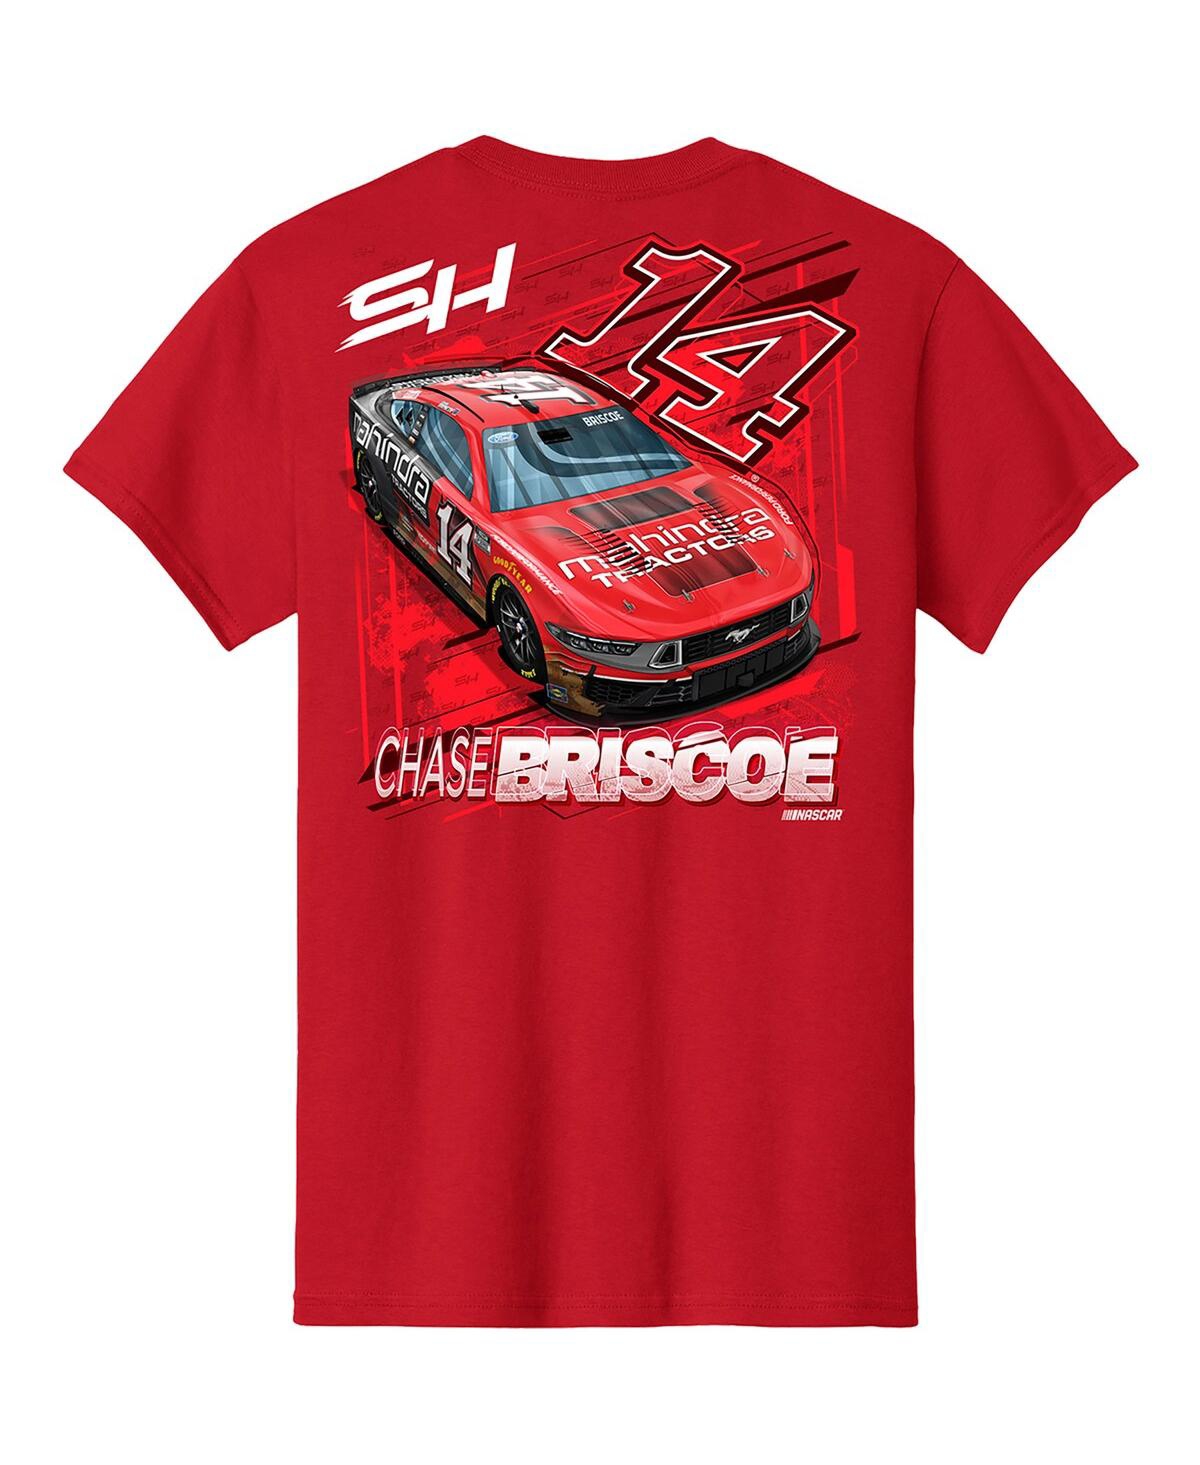 Shop Stewart-haas Racing Team Collection Men's  Red Chase Briscoe Car T-shirt